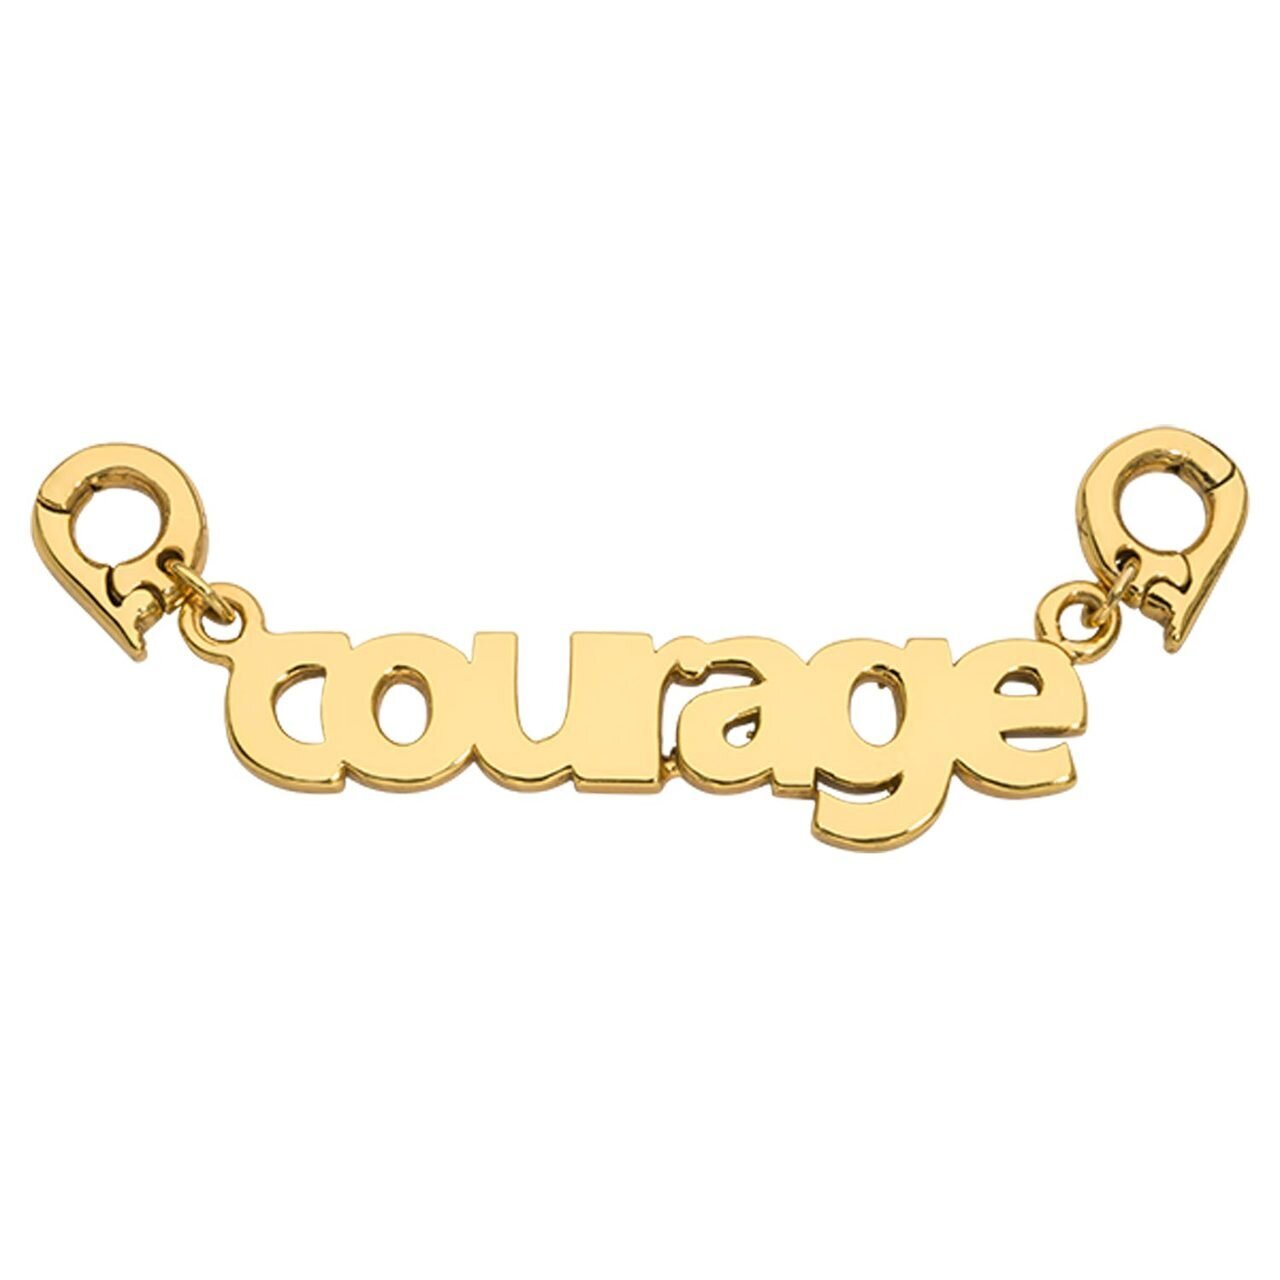 Nikki Lissoni Courage Tag Gold-plated 39 x 10mm D1238GL